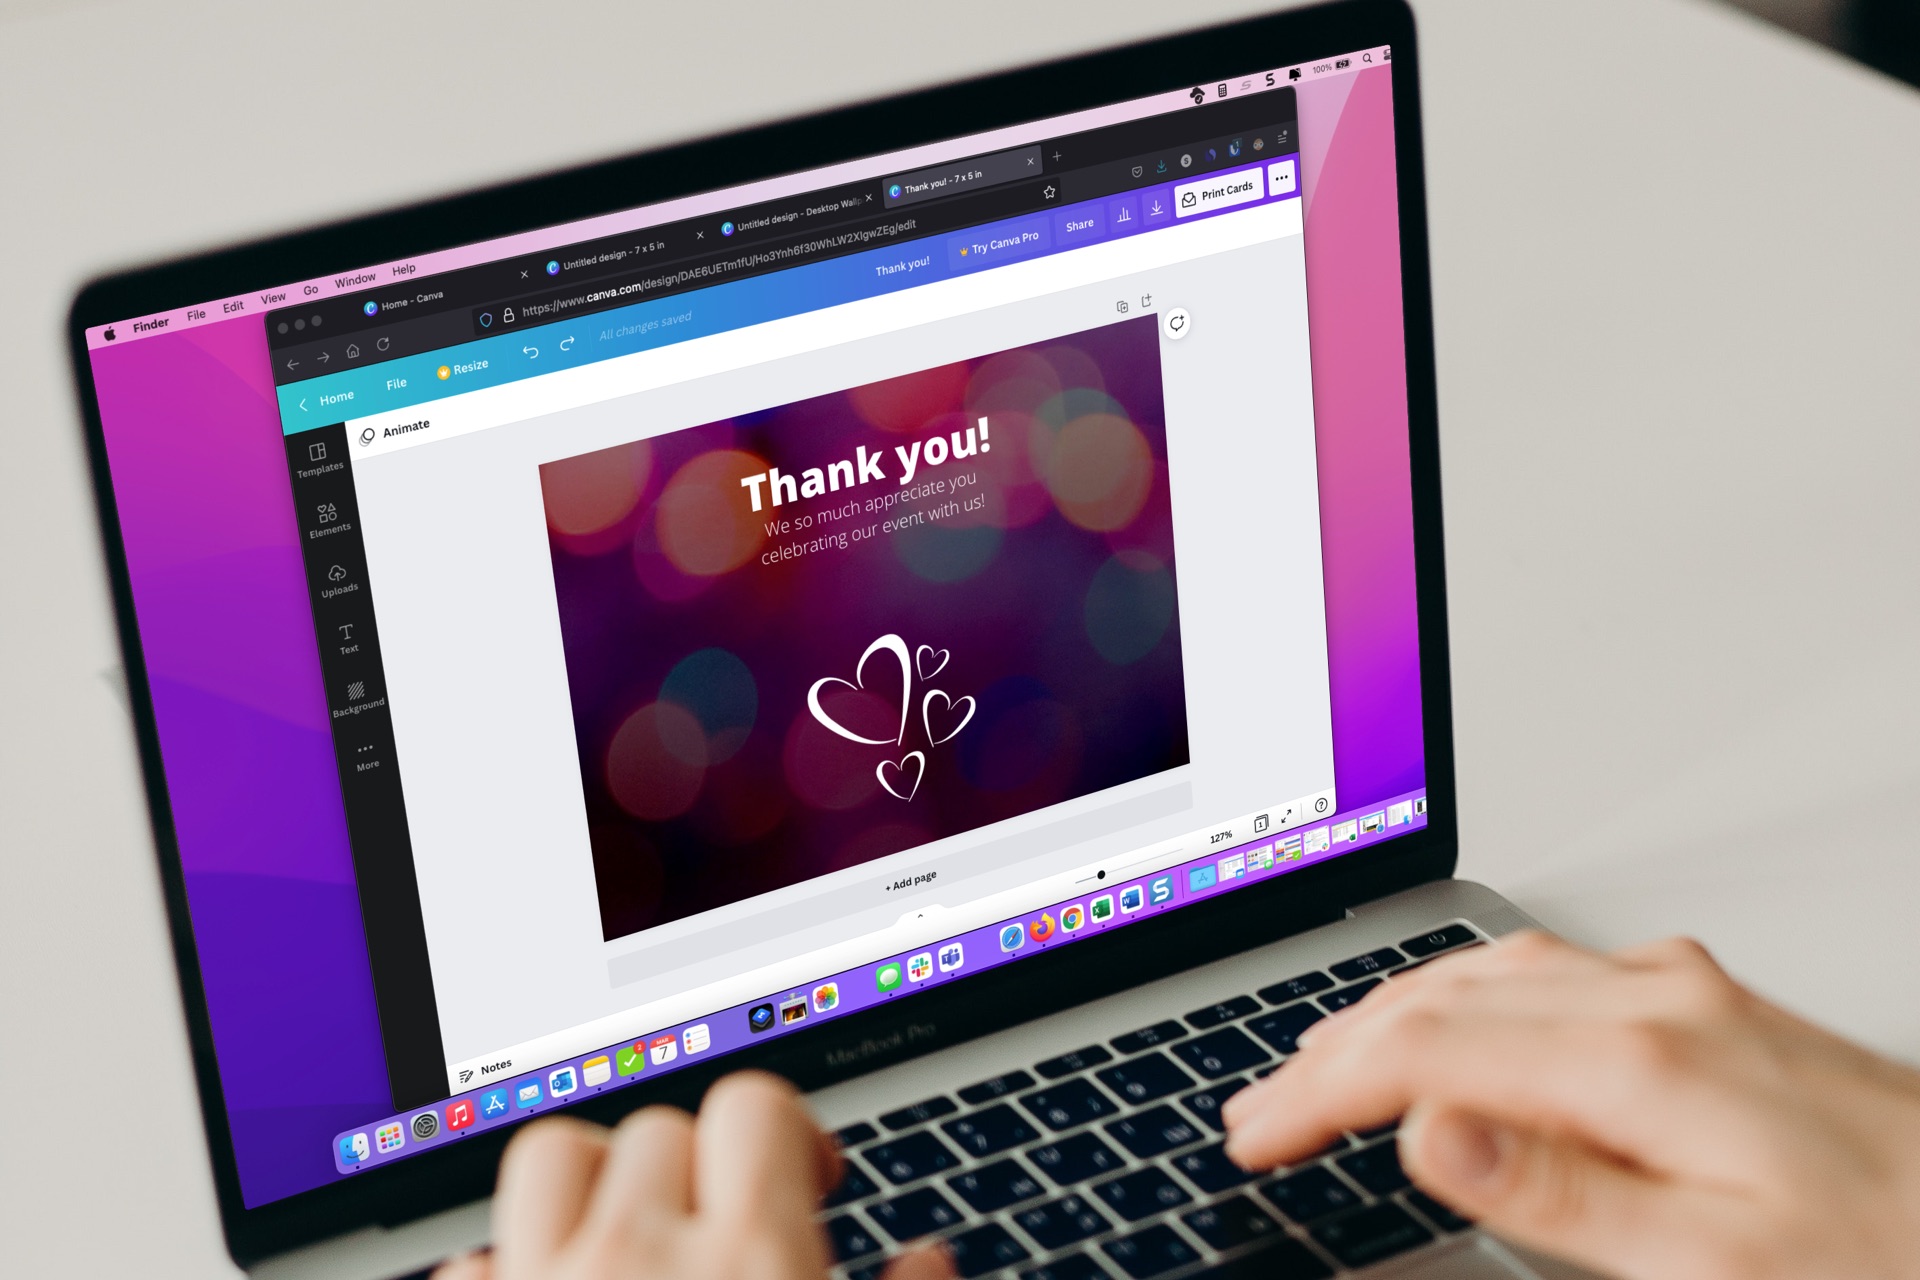 How to use Canva | Digital Trends